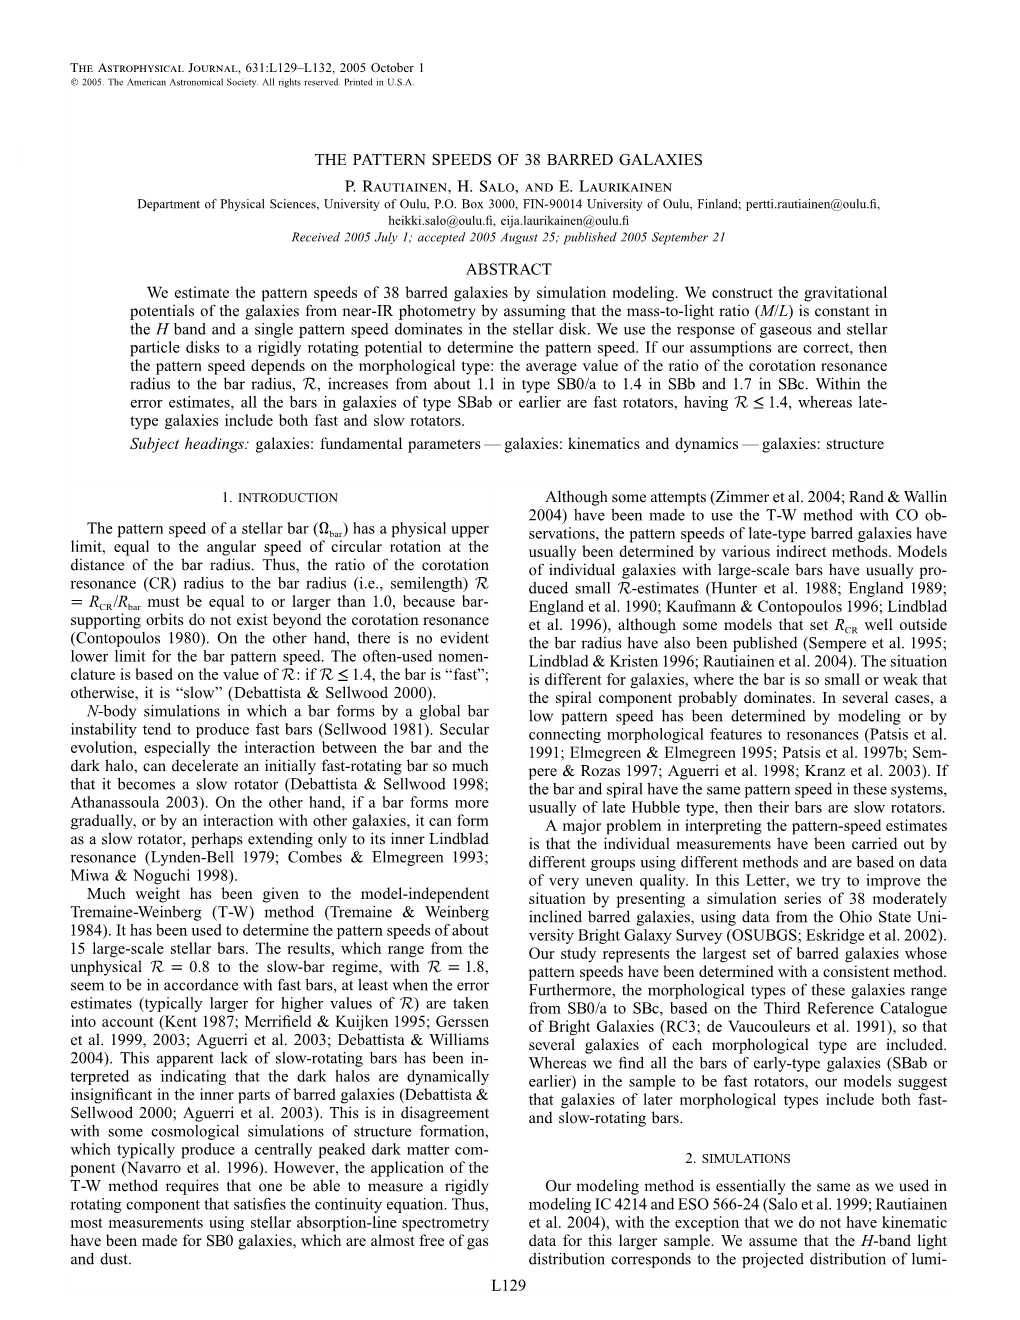 THE PATTERN SPEEDS of 38 BARRED GALAXIES P. Rautiainen, H. Salo, and E